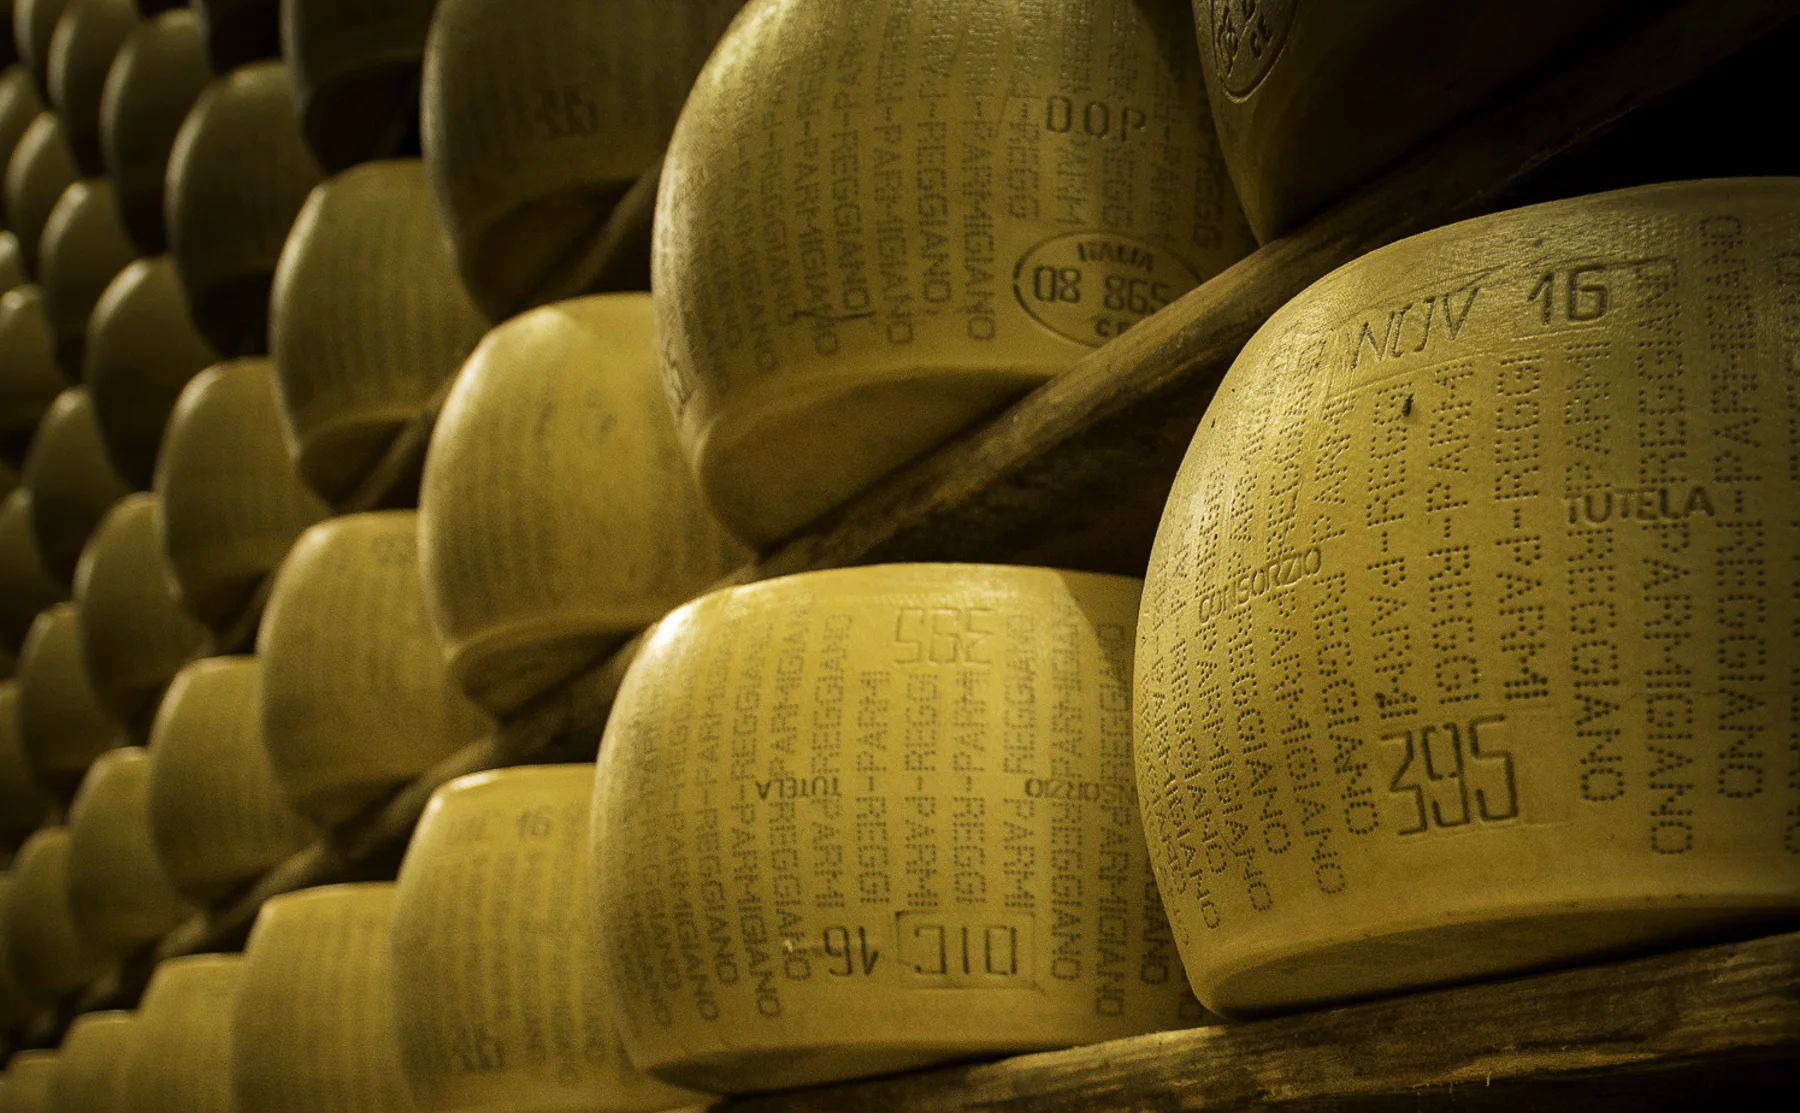 Take A Tour Of Italy’s Most Iconic Cheese Factory - 814339